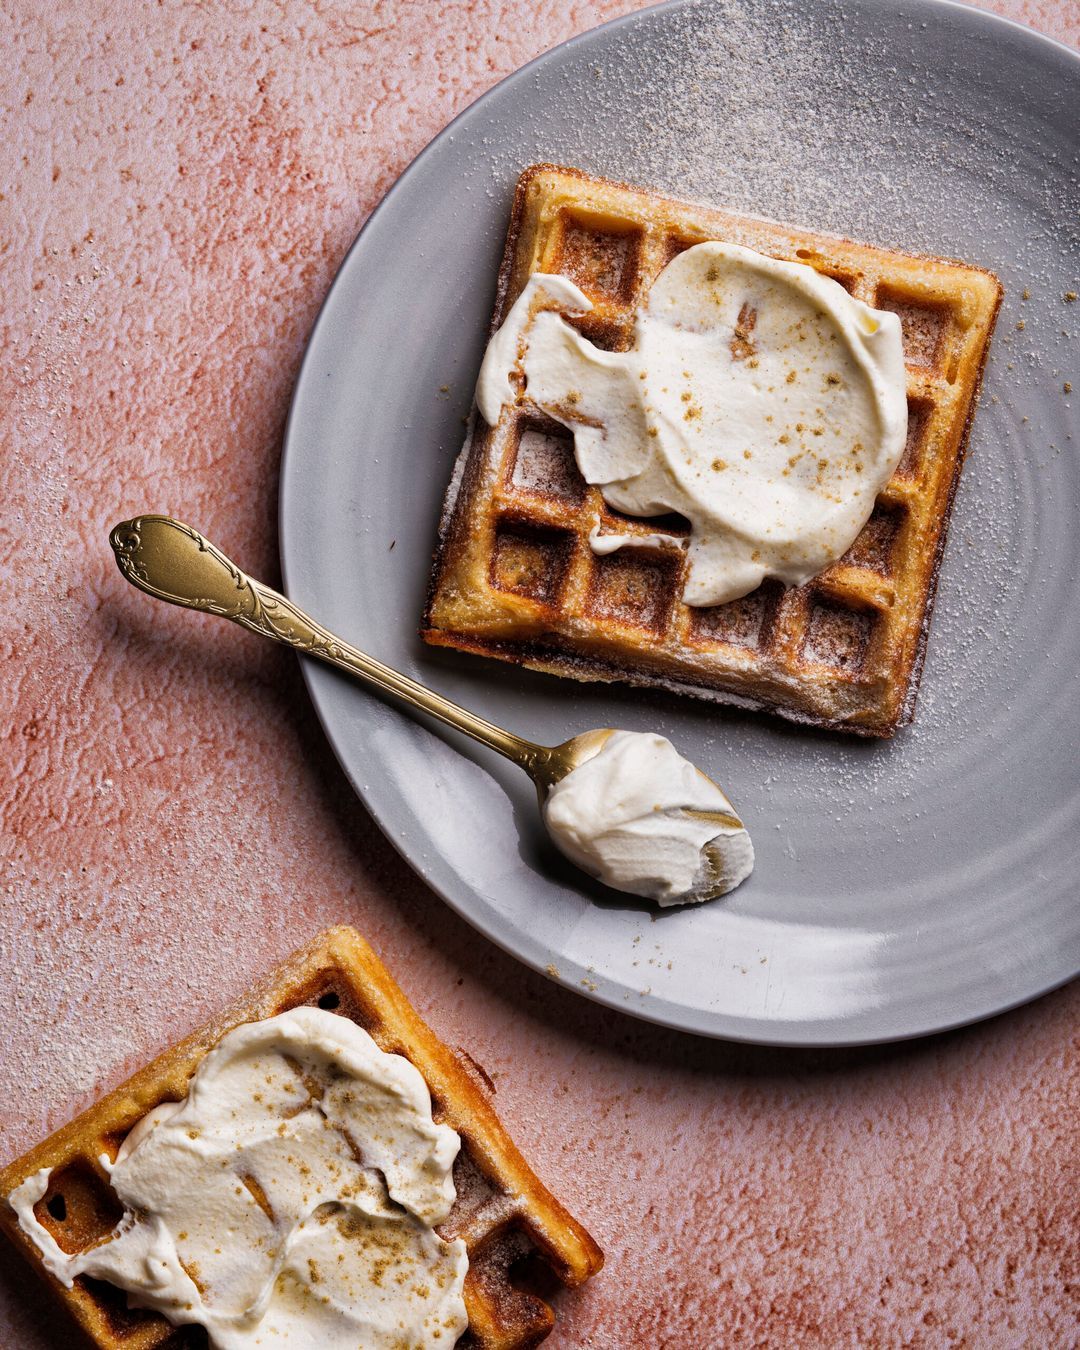 Beurre noiseette waffles with cardamom sugar